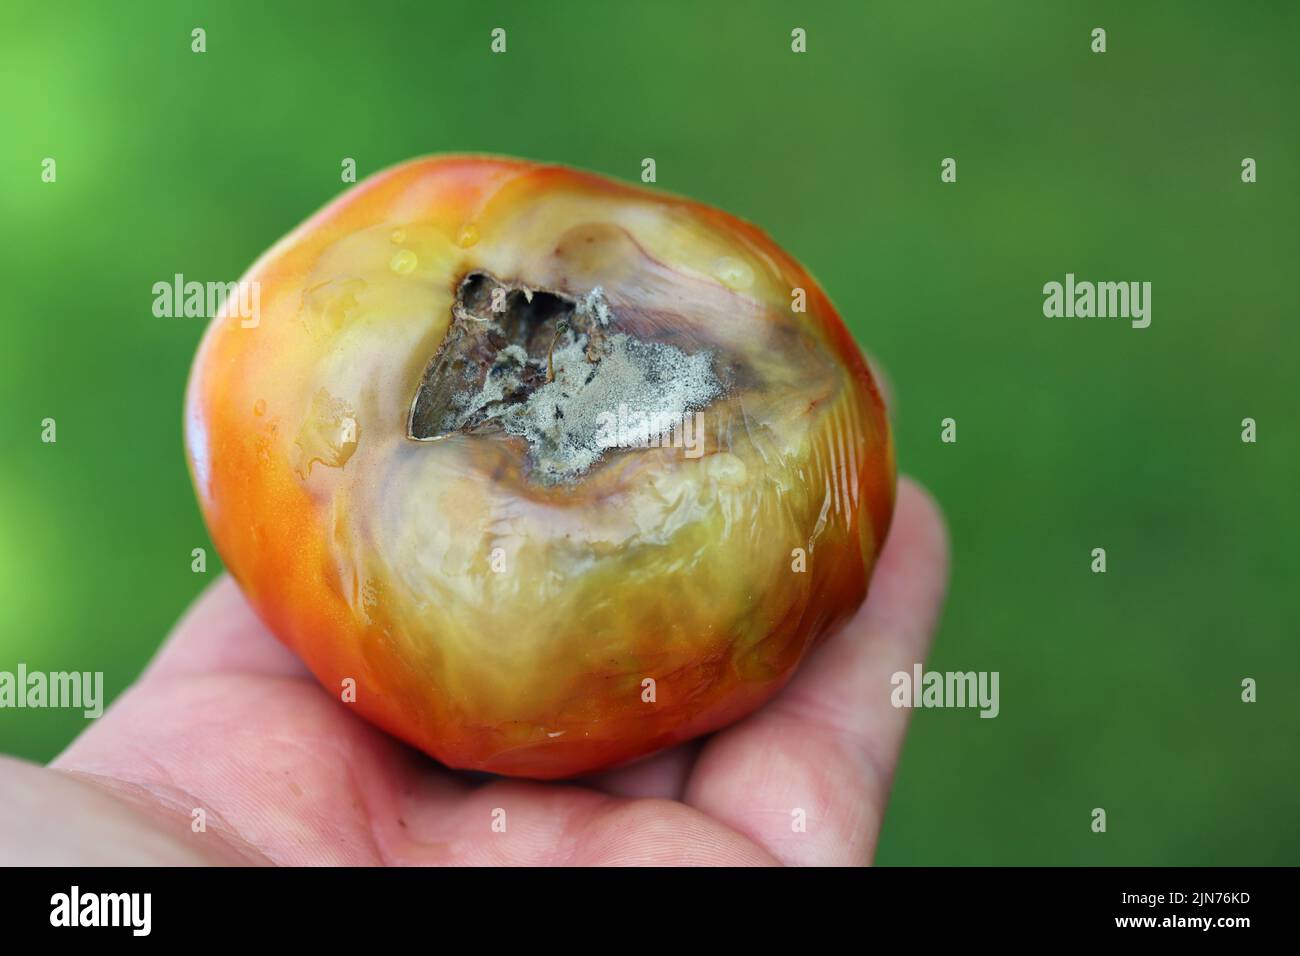 Still green, unripe, young tomato fruits affected by blossom end rot. This physiological disorder in tomato, caused by calcium deficiency. Stock Photo